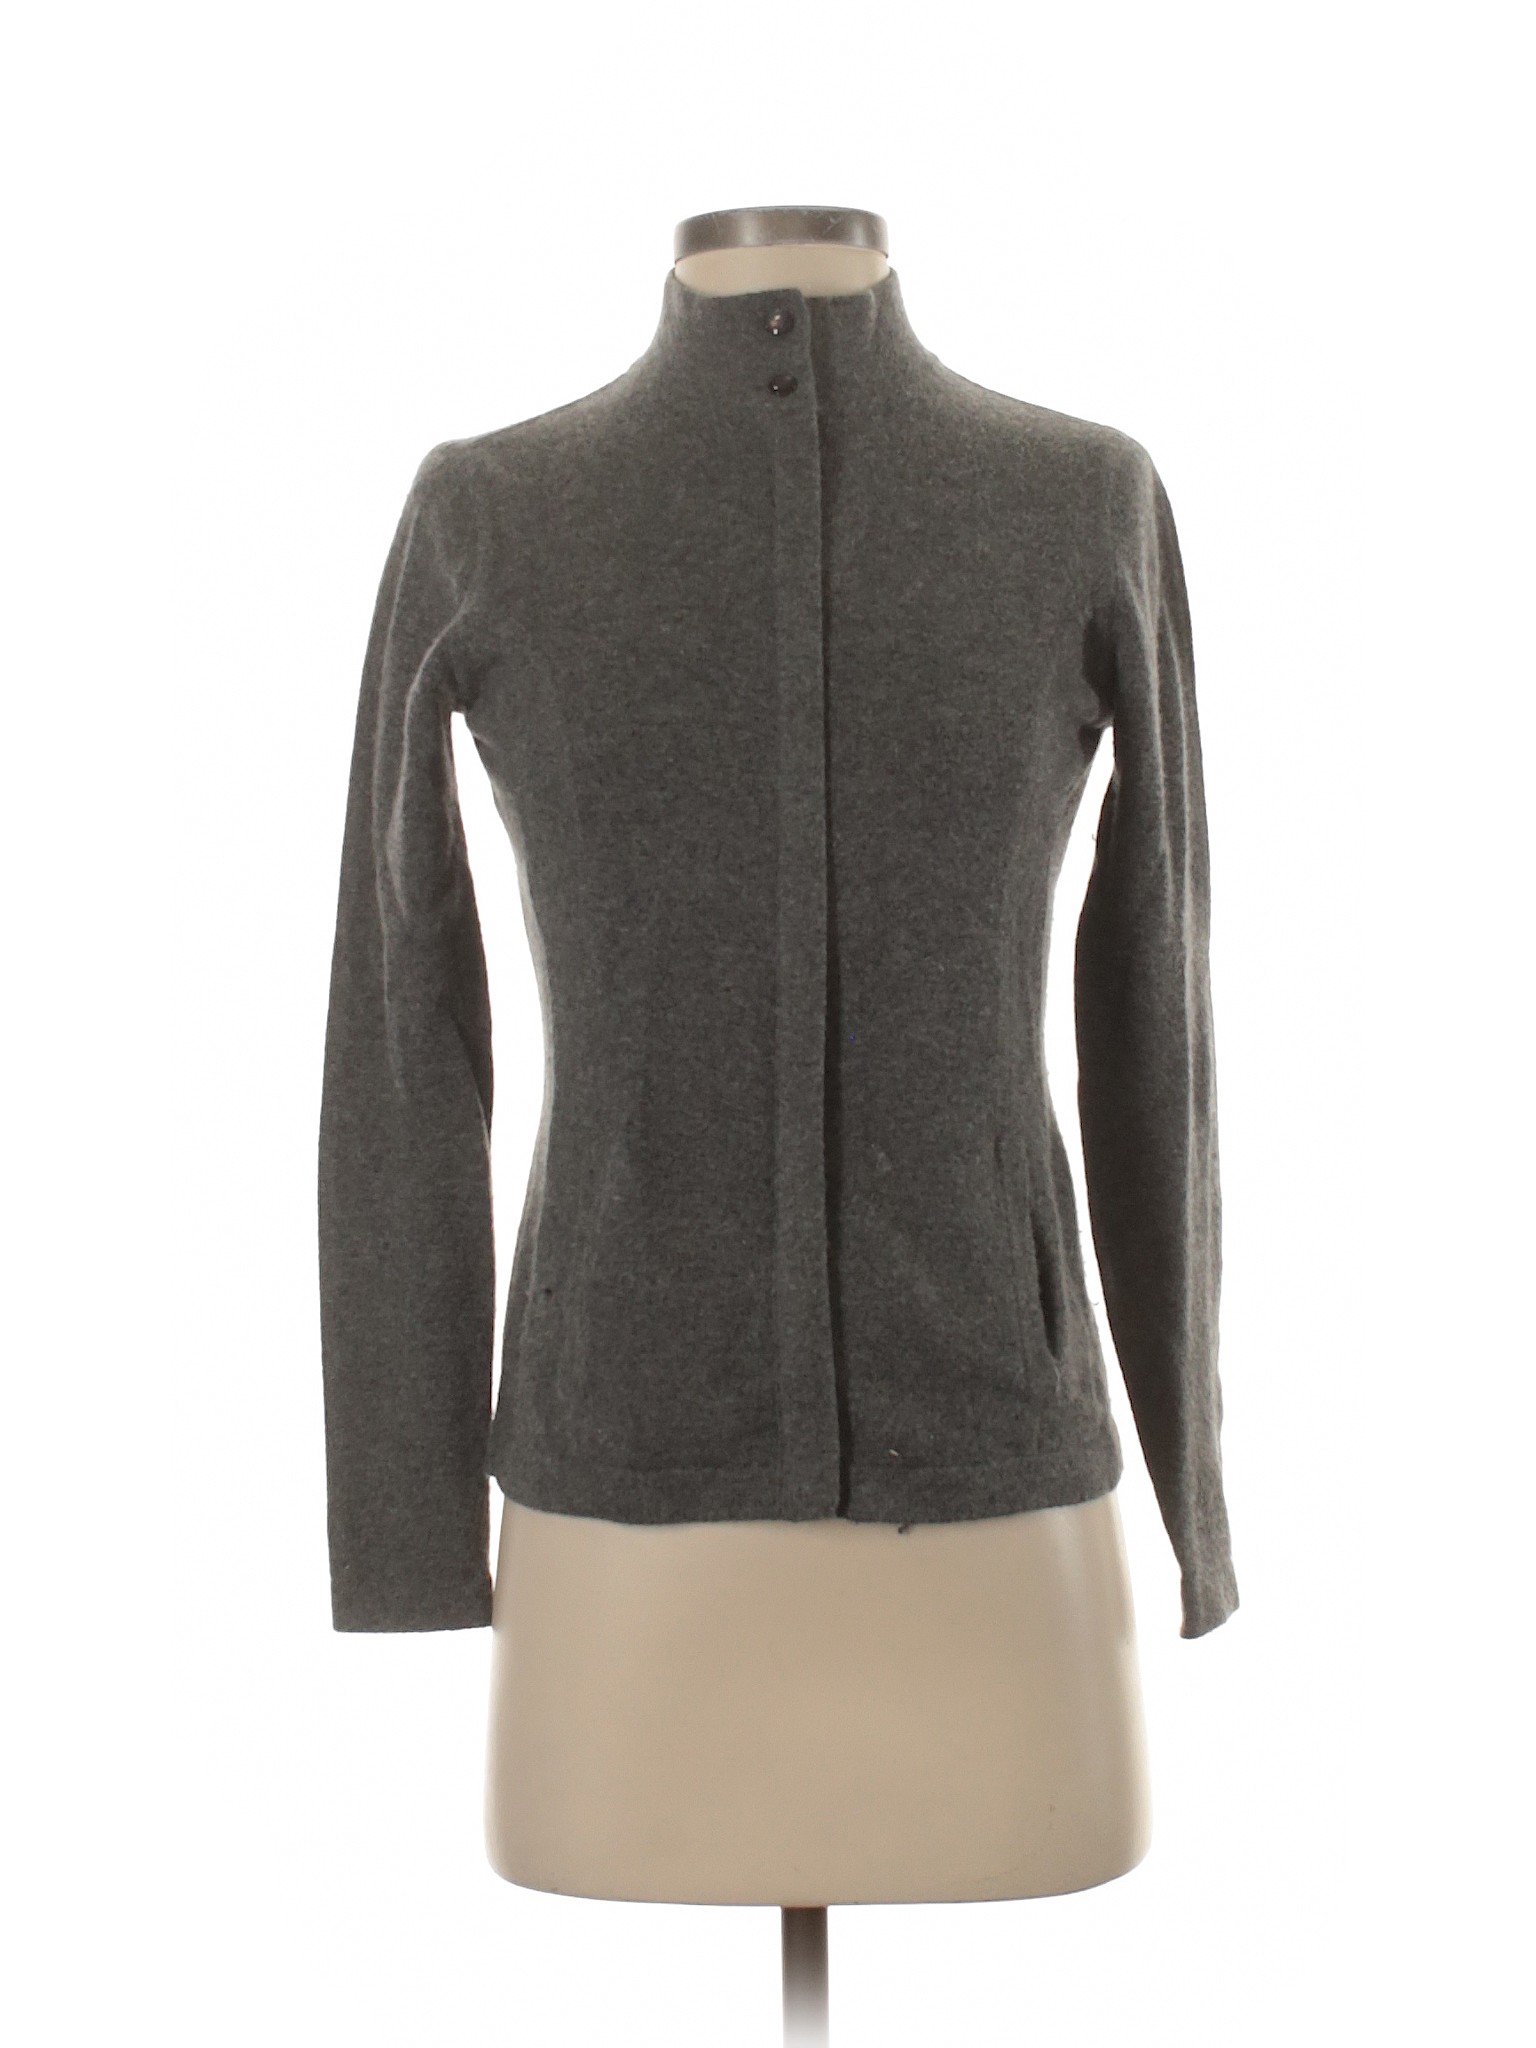 Just Cashmere By Forte 100% Cashmere Solid Gray Cashmere Cardigan Size ...